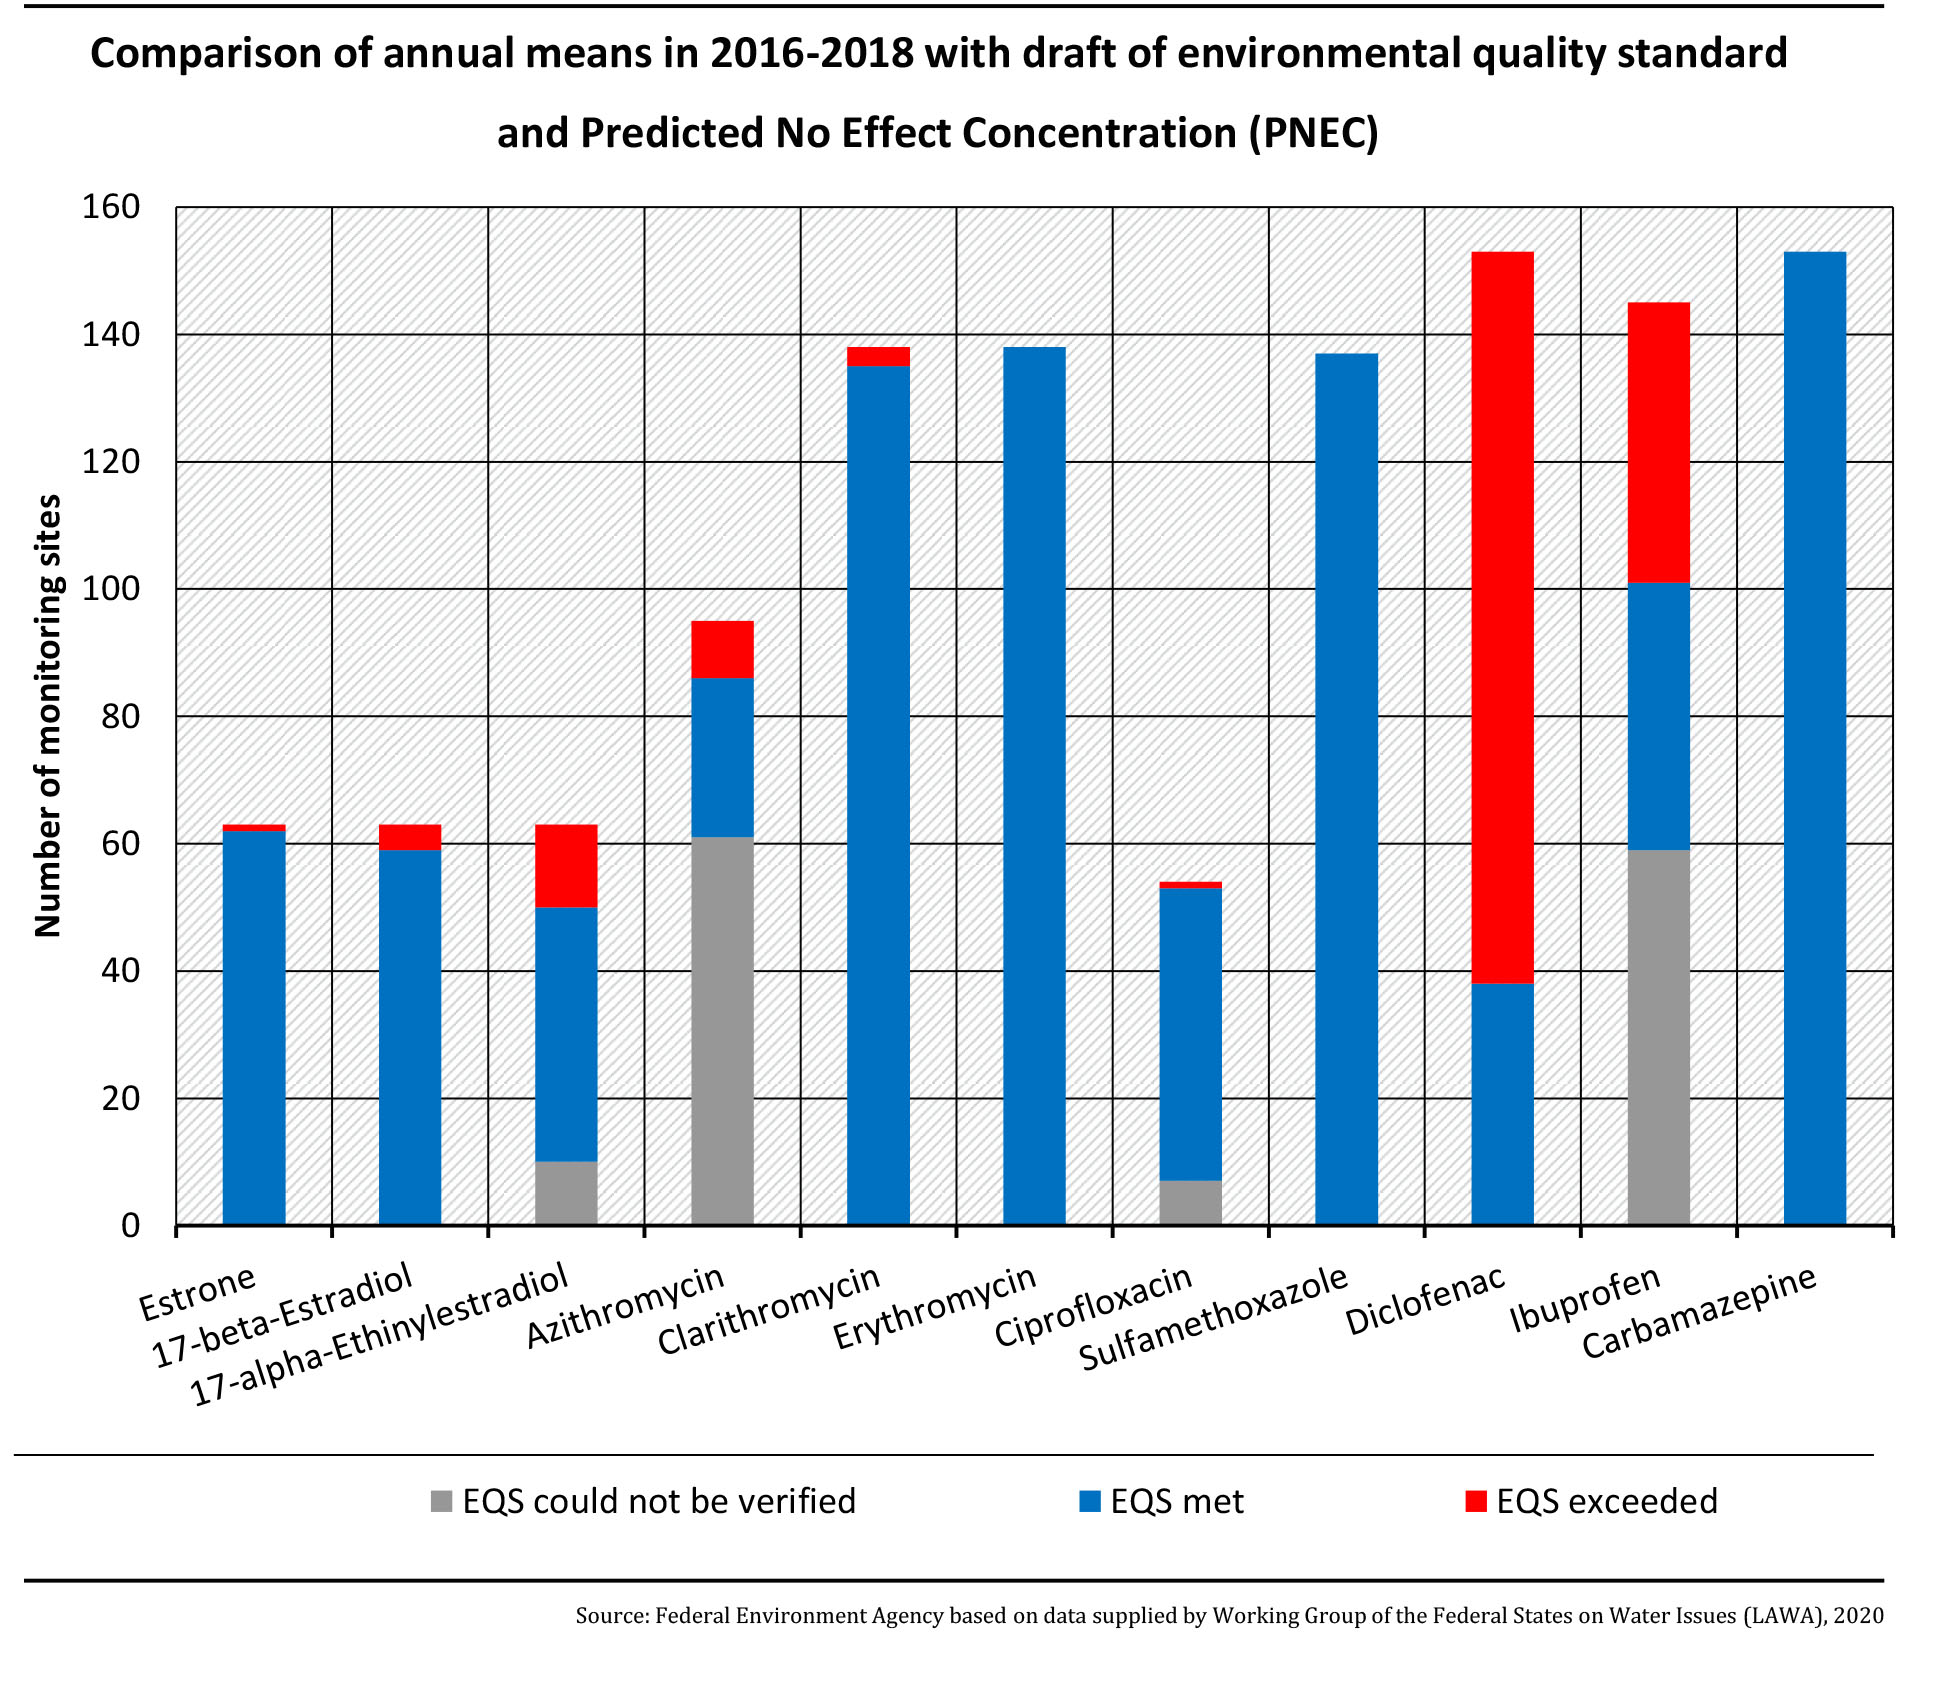 Comparison of annual means in 2016-2018 with draft of environmental quality standard and Predicted No Effect Concentration (PNEC)